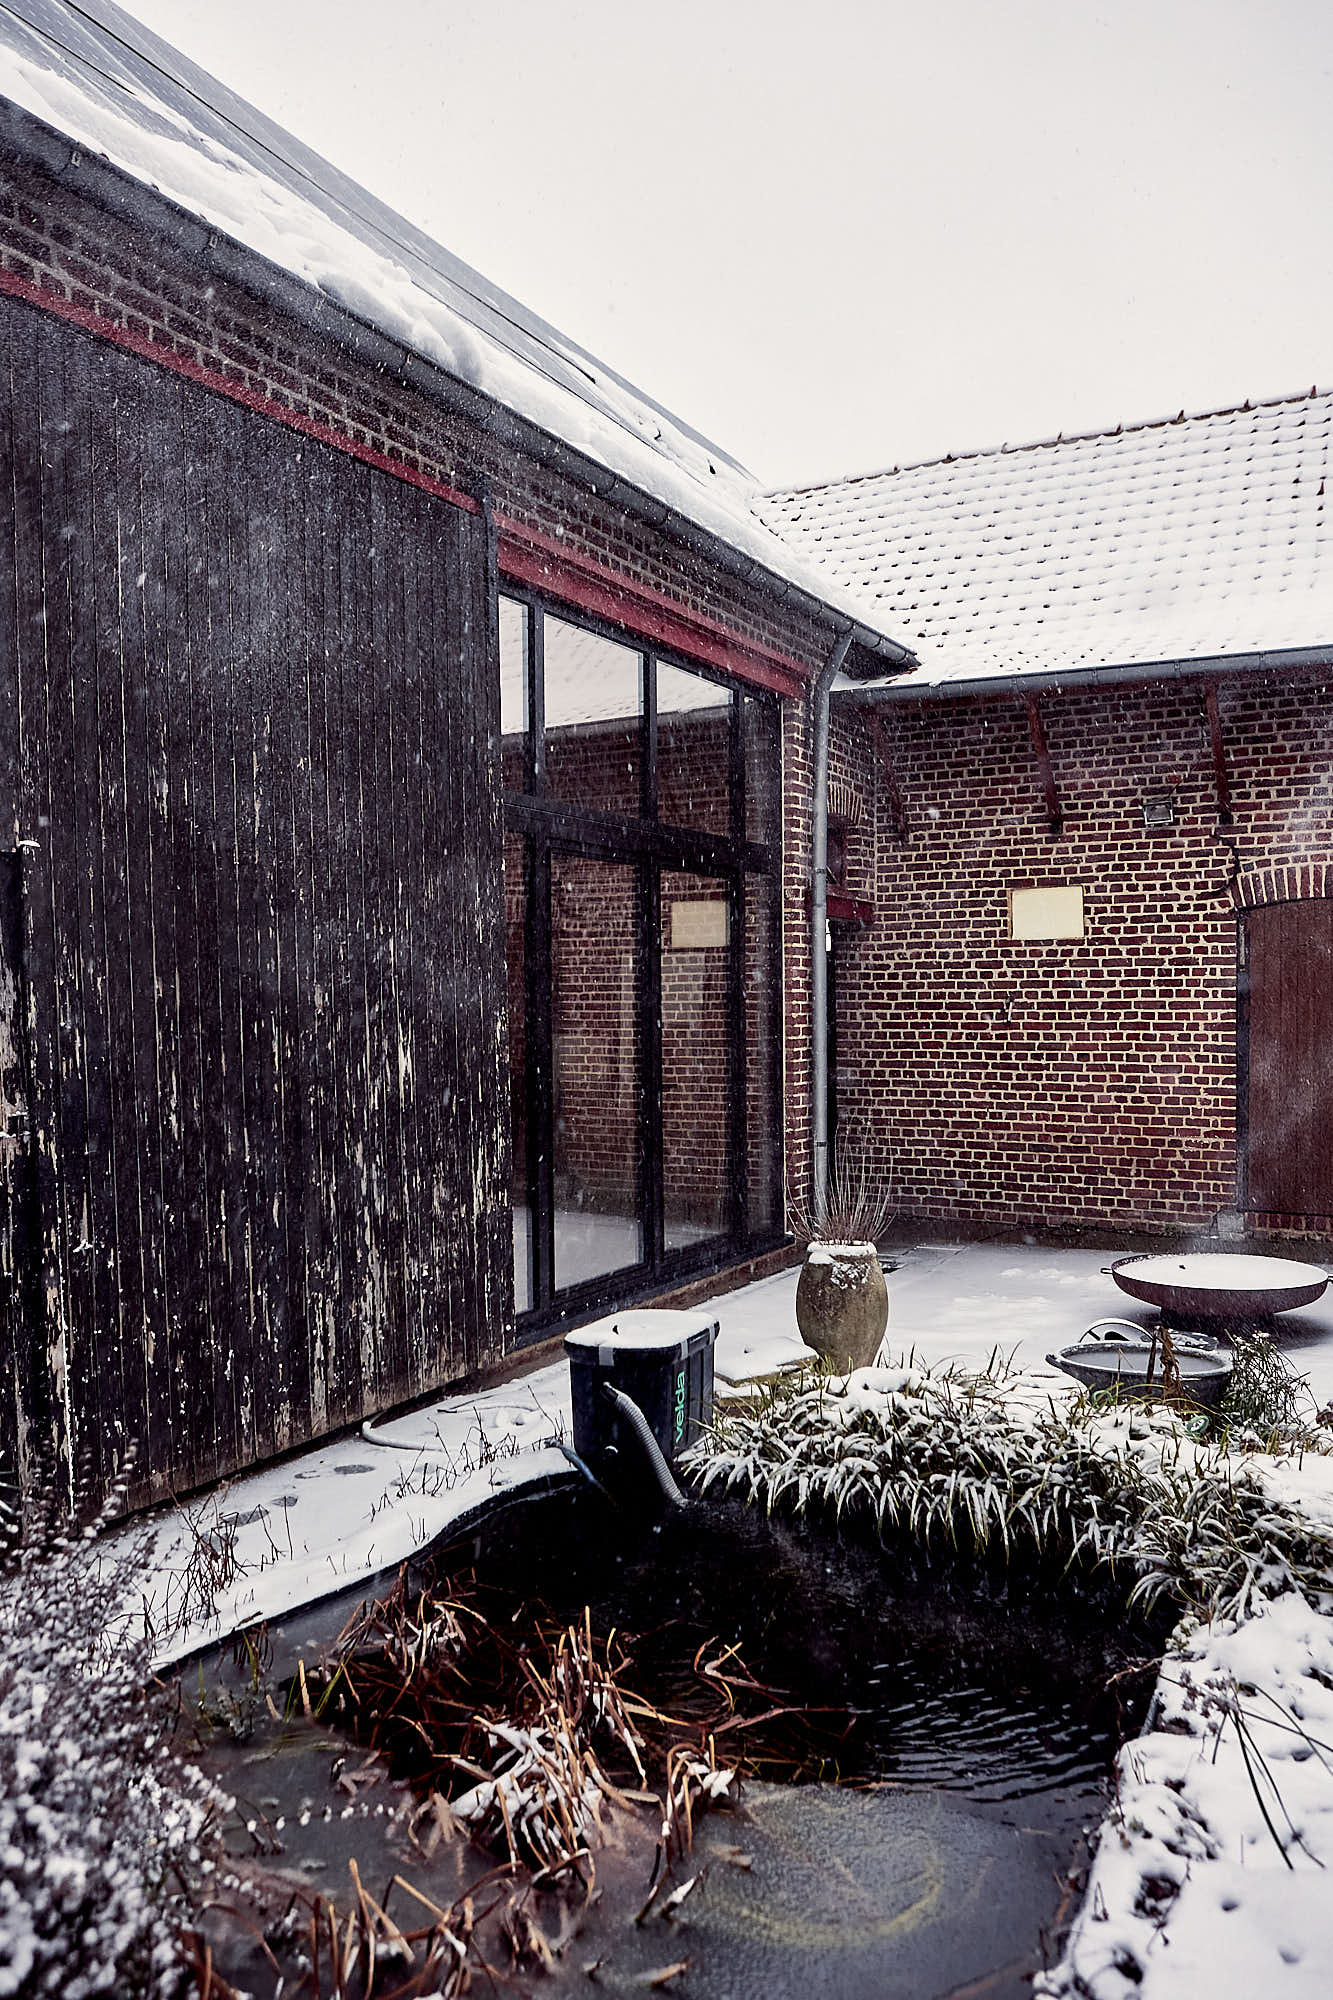 courtyard and pond with a farm surrounding it in the snow